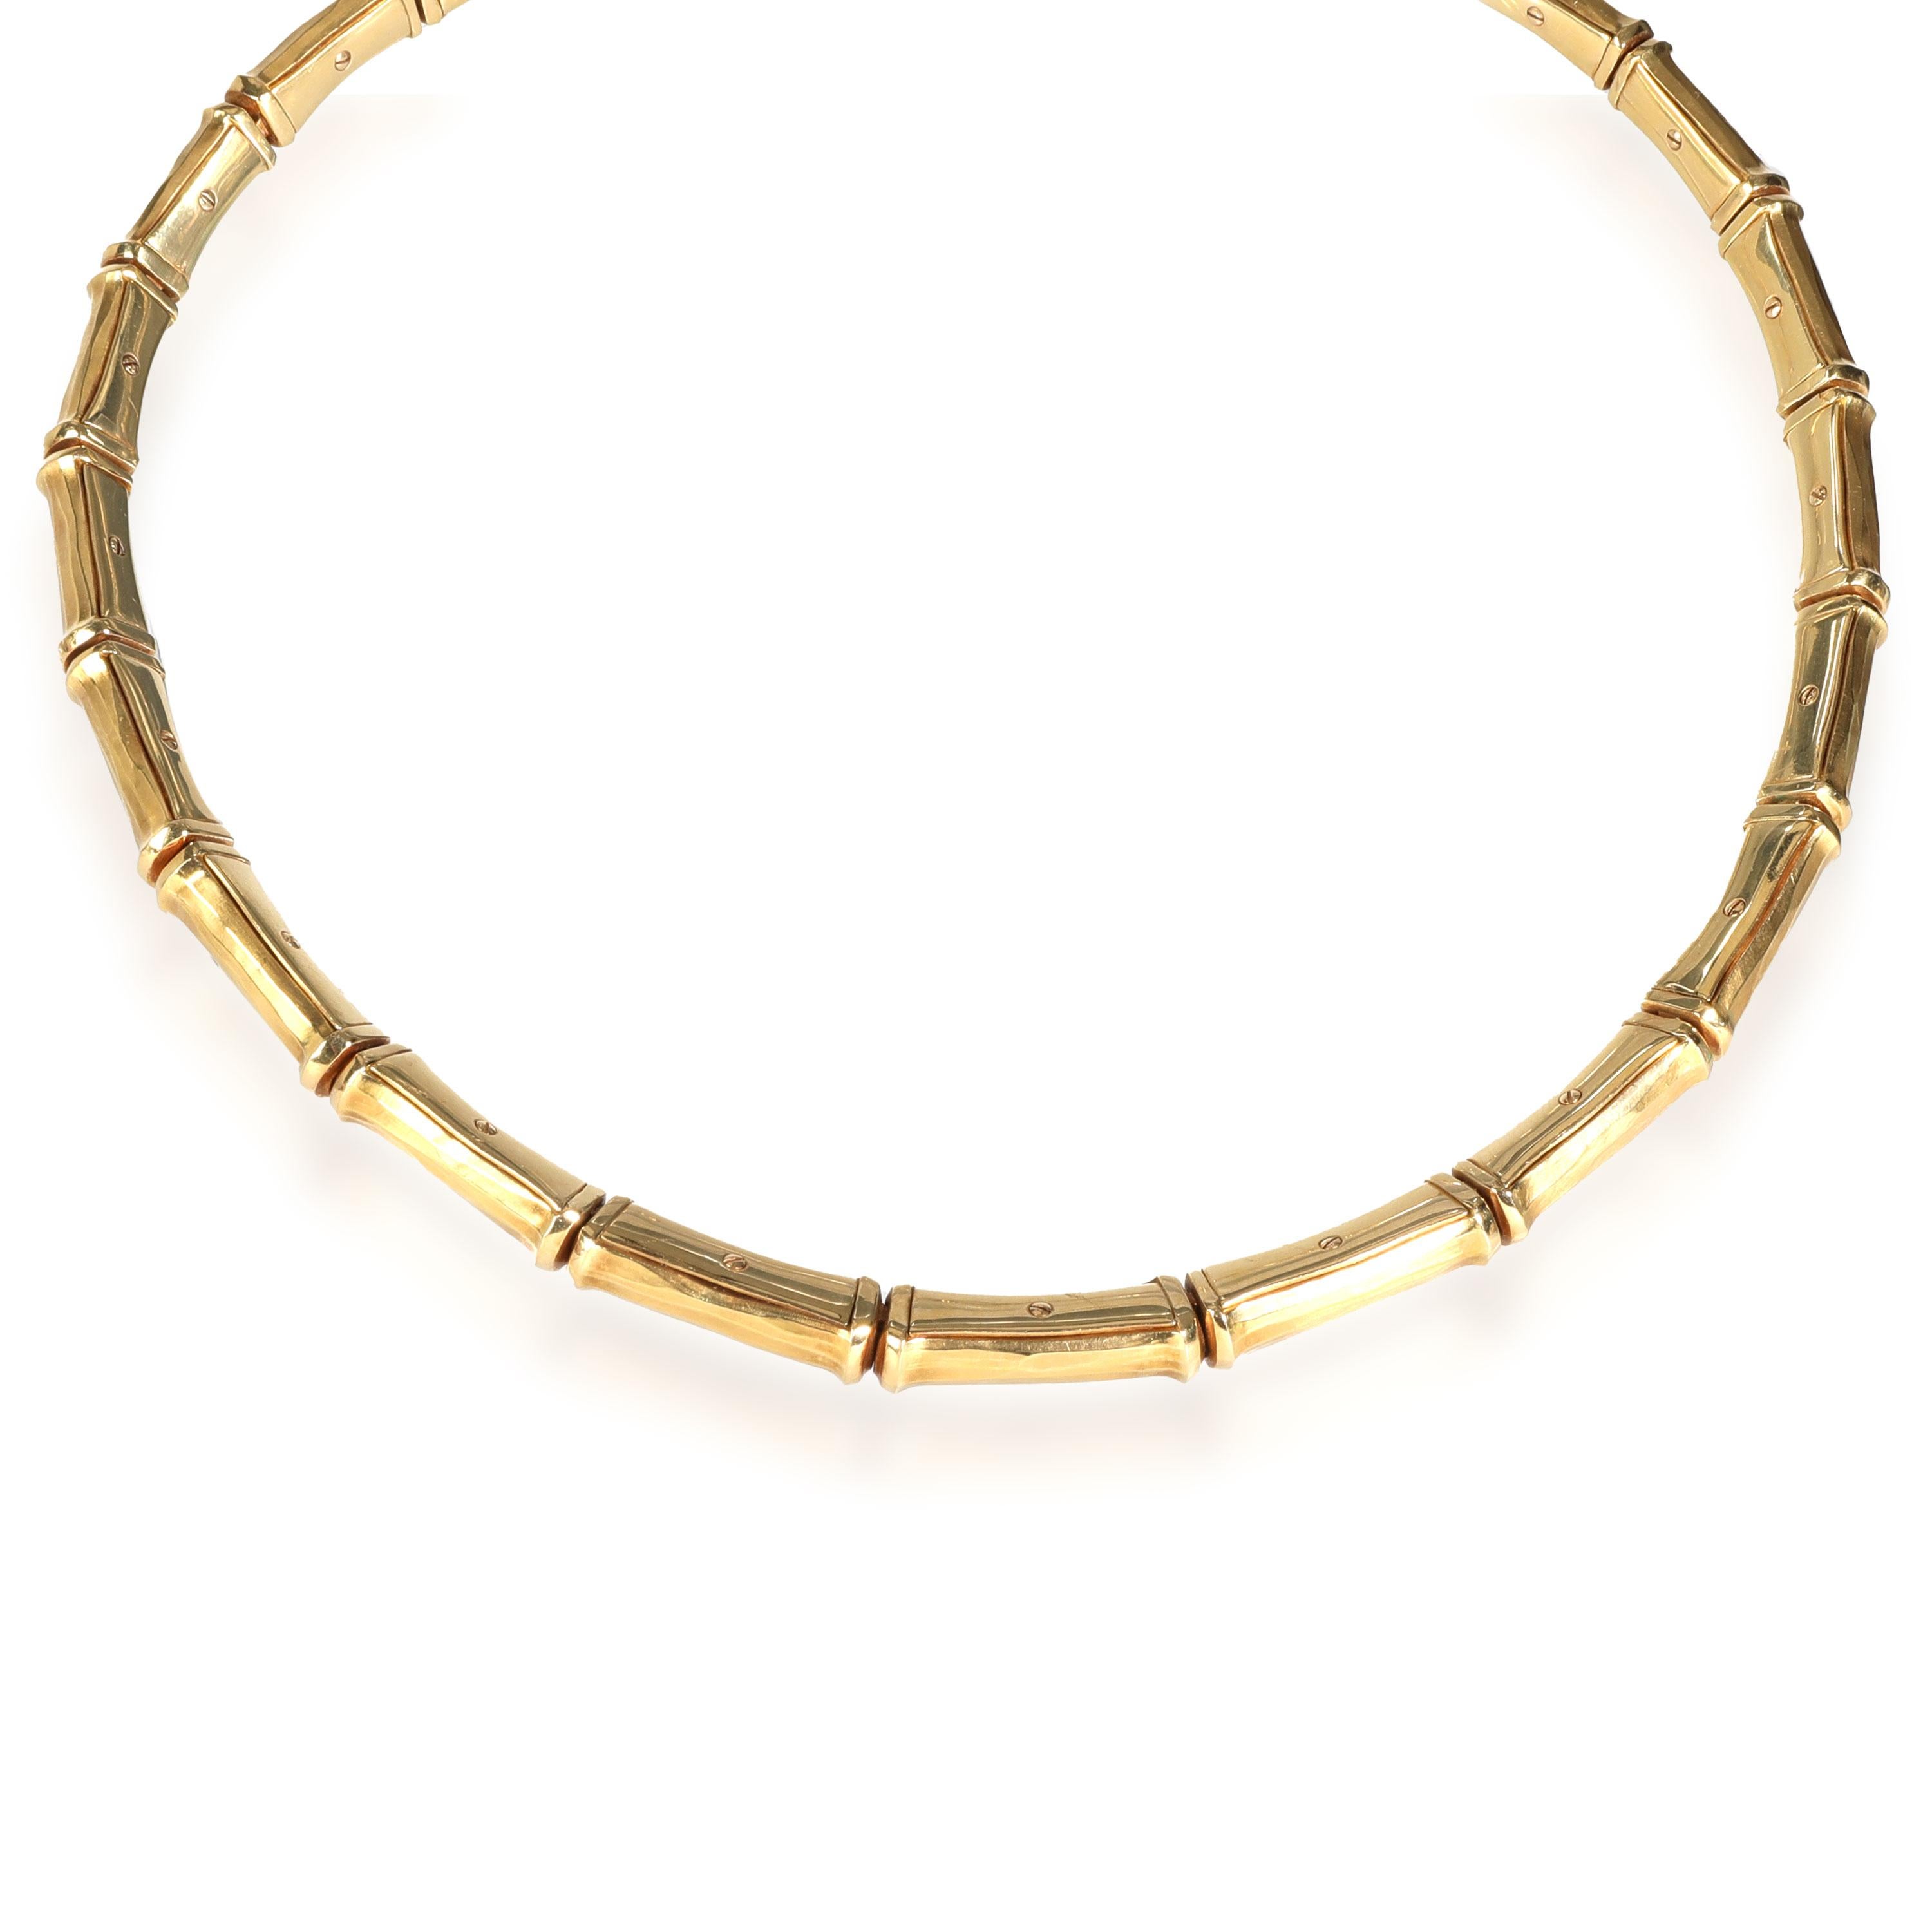 Cartier Bamboo Necklace in 18K Yellow Gold

PRIMARY DETAILS
SKU: 115373
Listing Title: Cartier Bamboo Necklace in 18K Yellow Gold
Condition Description: In excellent condition and recently polished. Comes with Box;Pouch; Inside circumference is